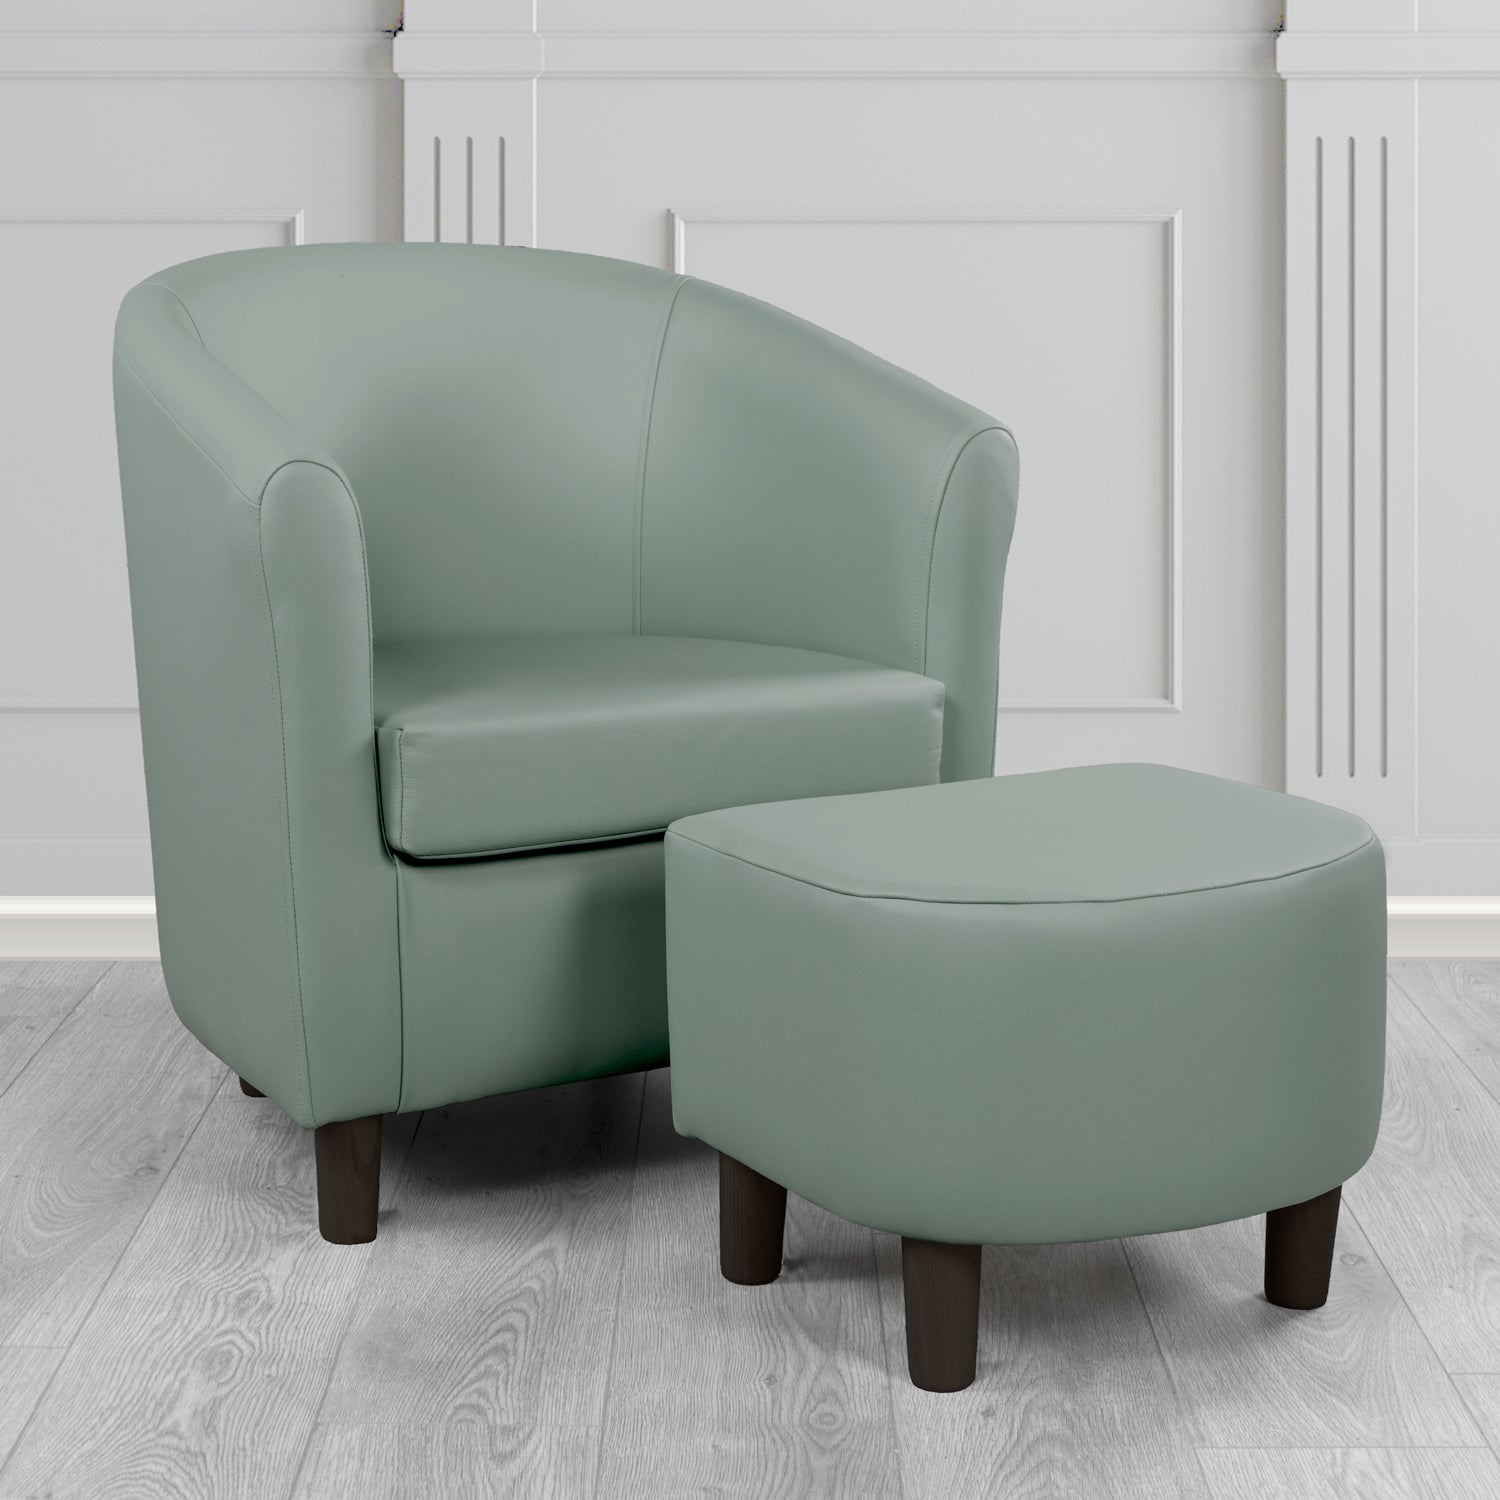 Tuscany Shelly Piping Crib 5 Genuine Leather Tub Chair & Footstool Set (6617151012906)